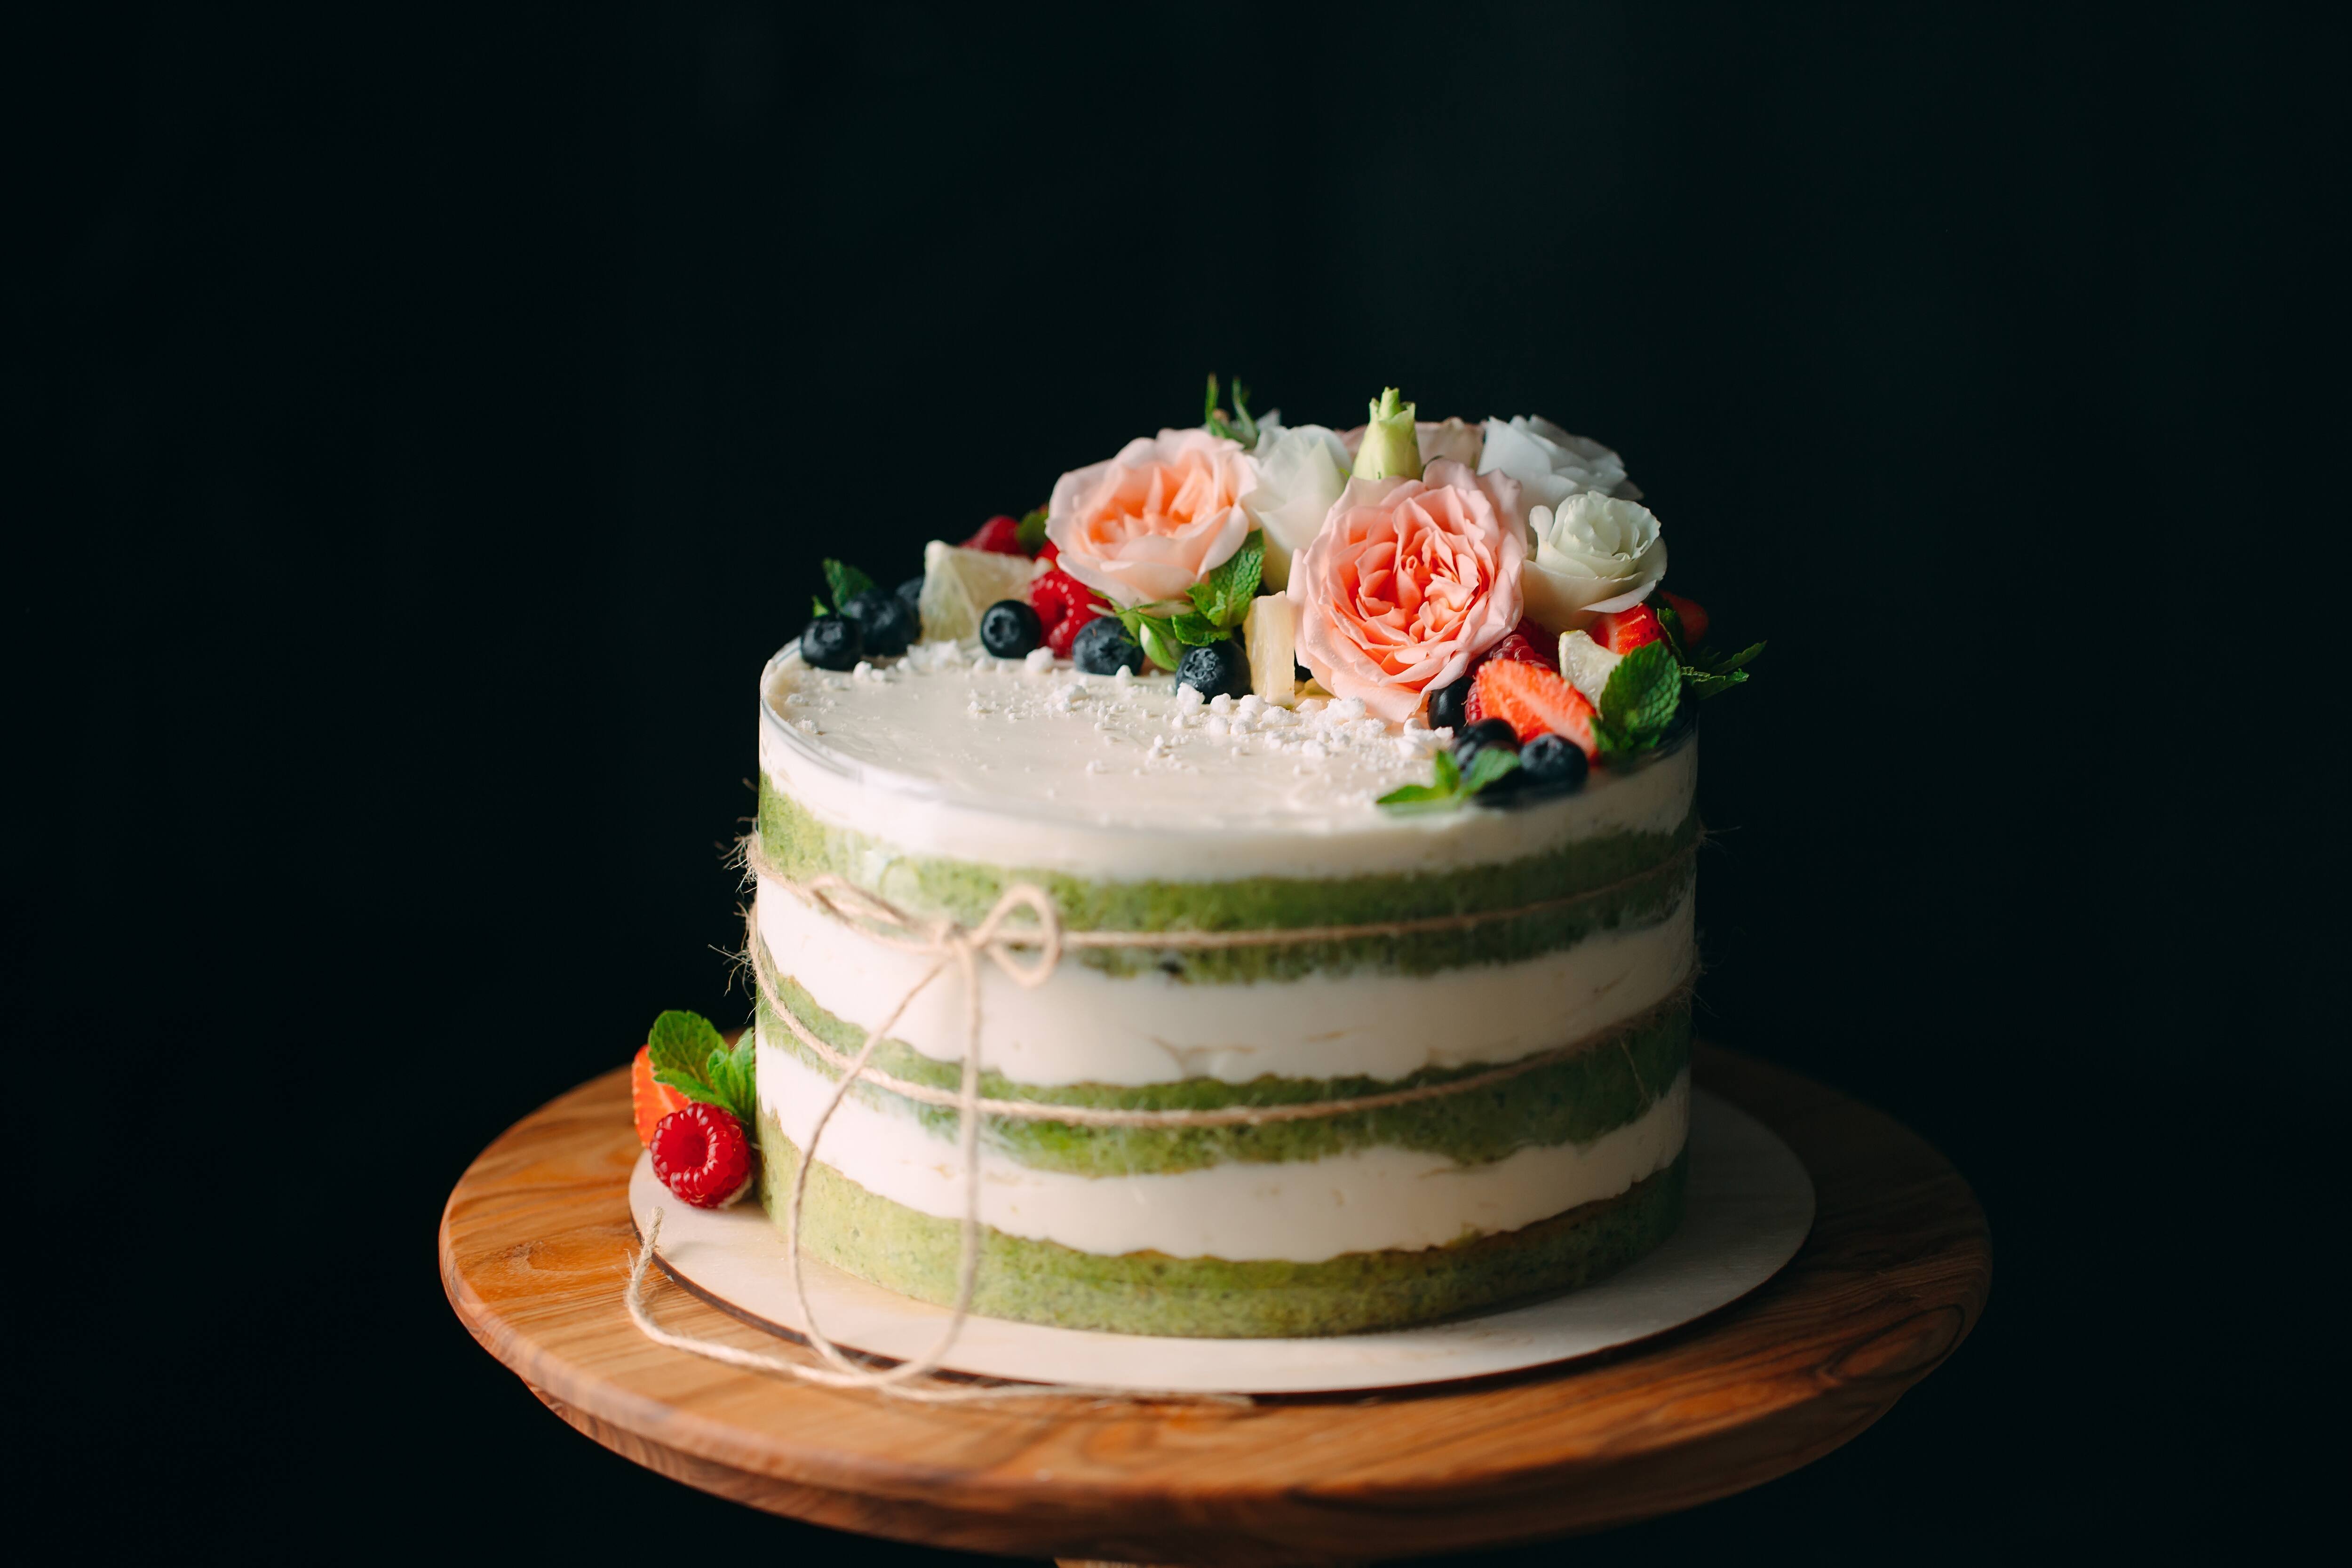 Cakes & More, Versova, Andheri West order online - Zomato